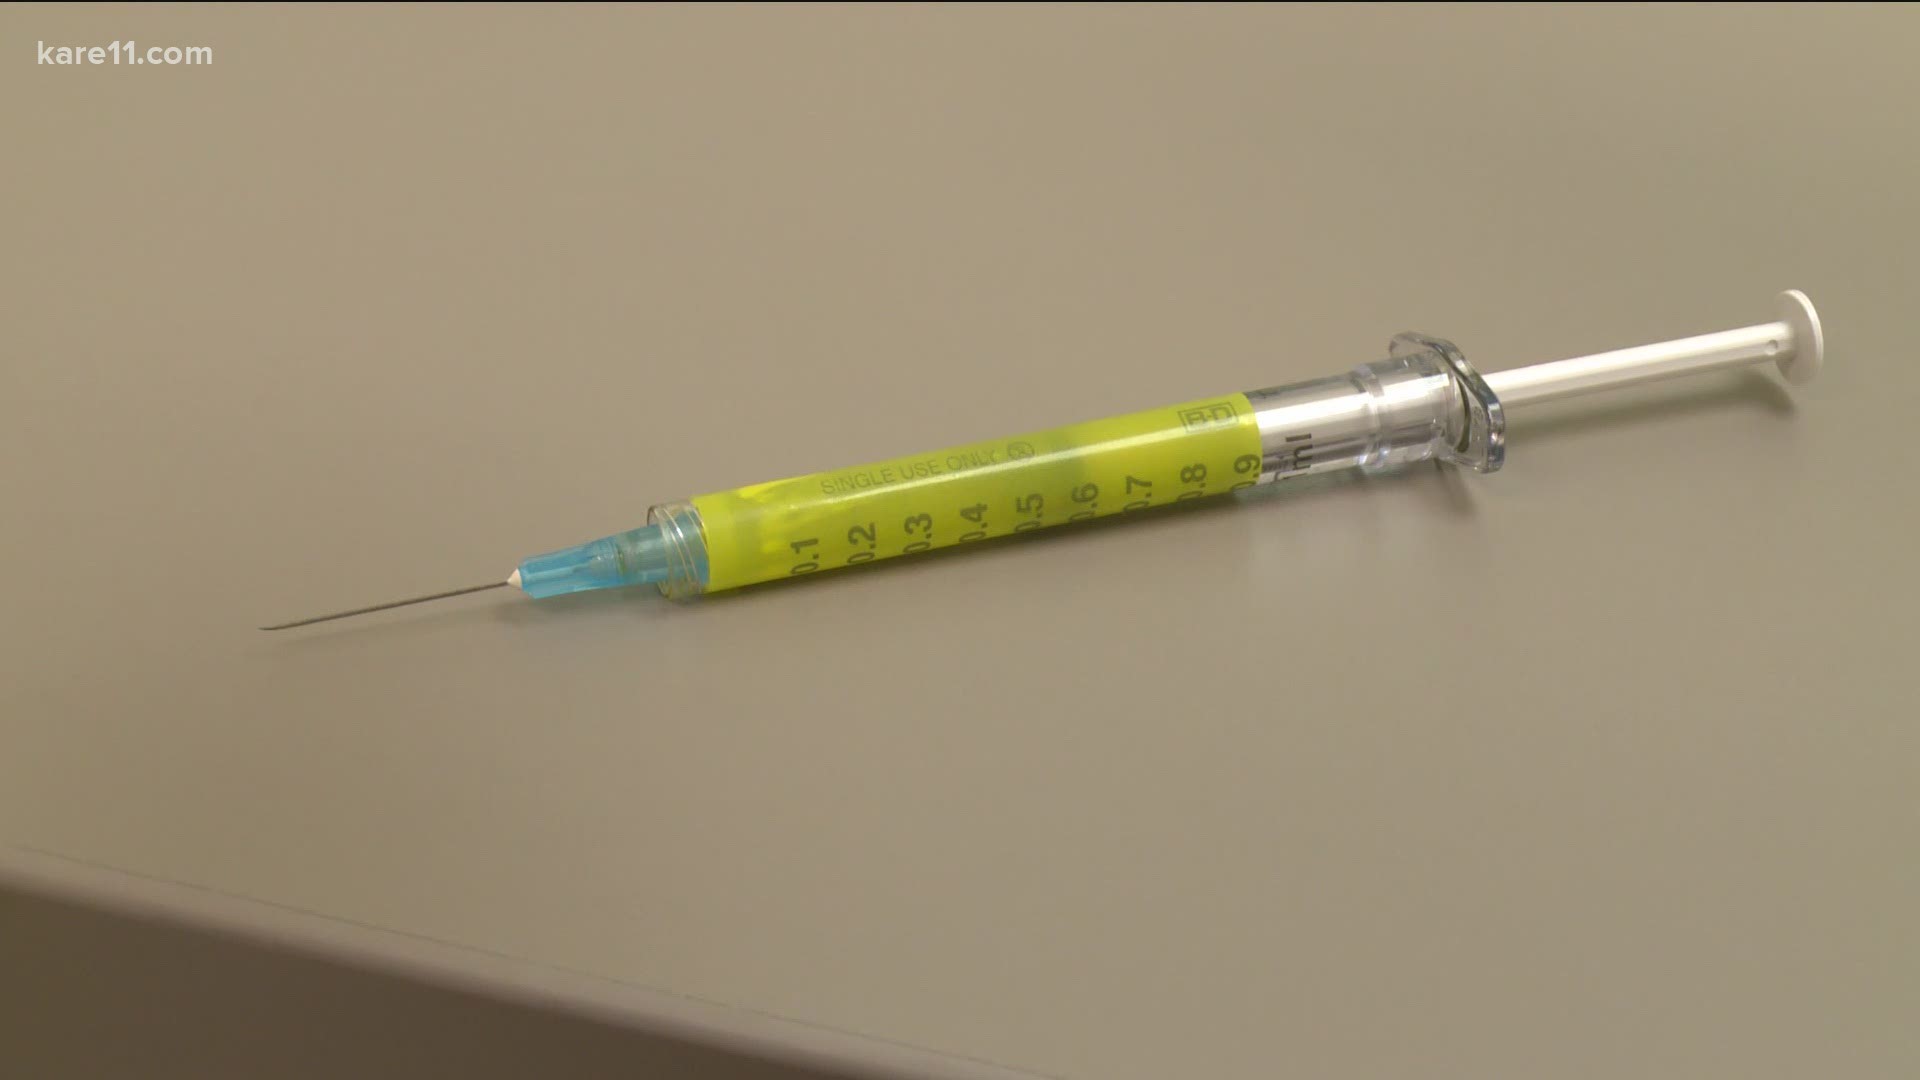 A Minnesota team is preparing for phase 3 trials of a Johnson & Johnson COVID-19 vaccine.